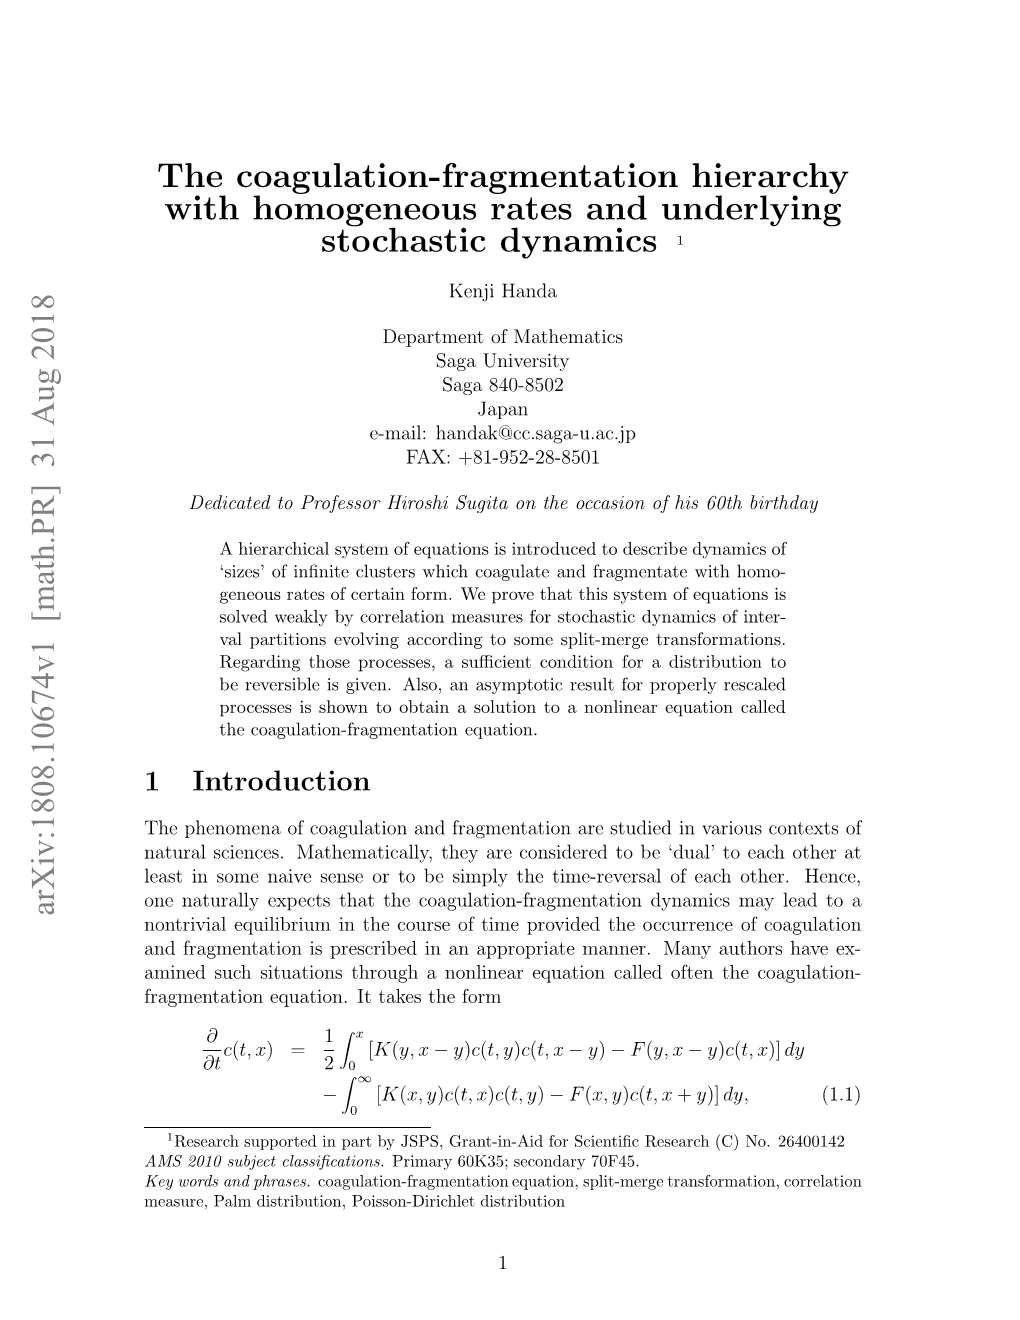 The Coagulation-Fragmentation Hierarchy with Homogeneous Rates and Underlying Stochastic Dynamics 1